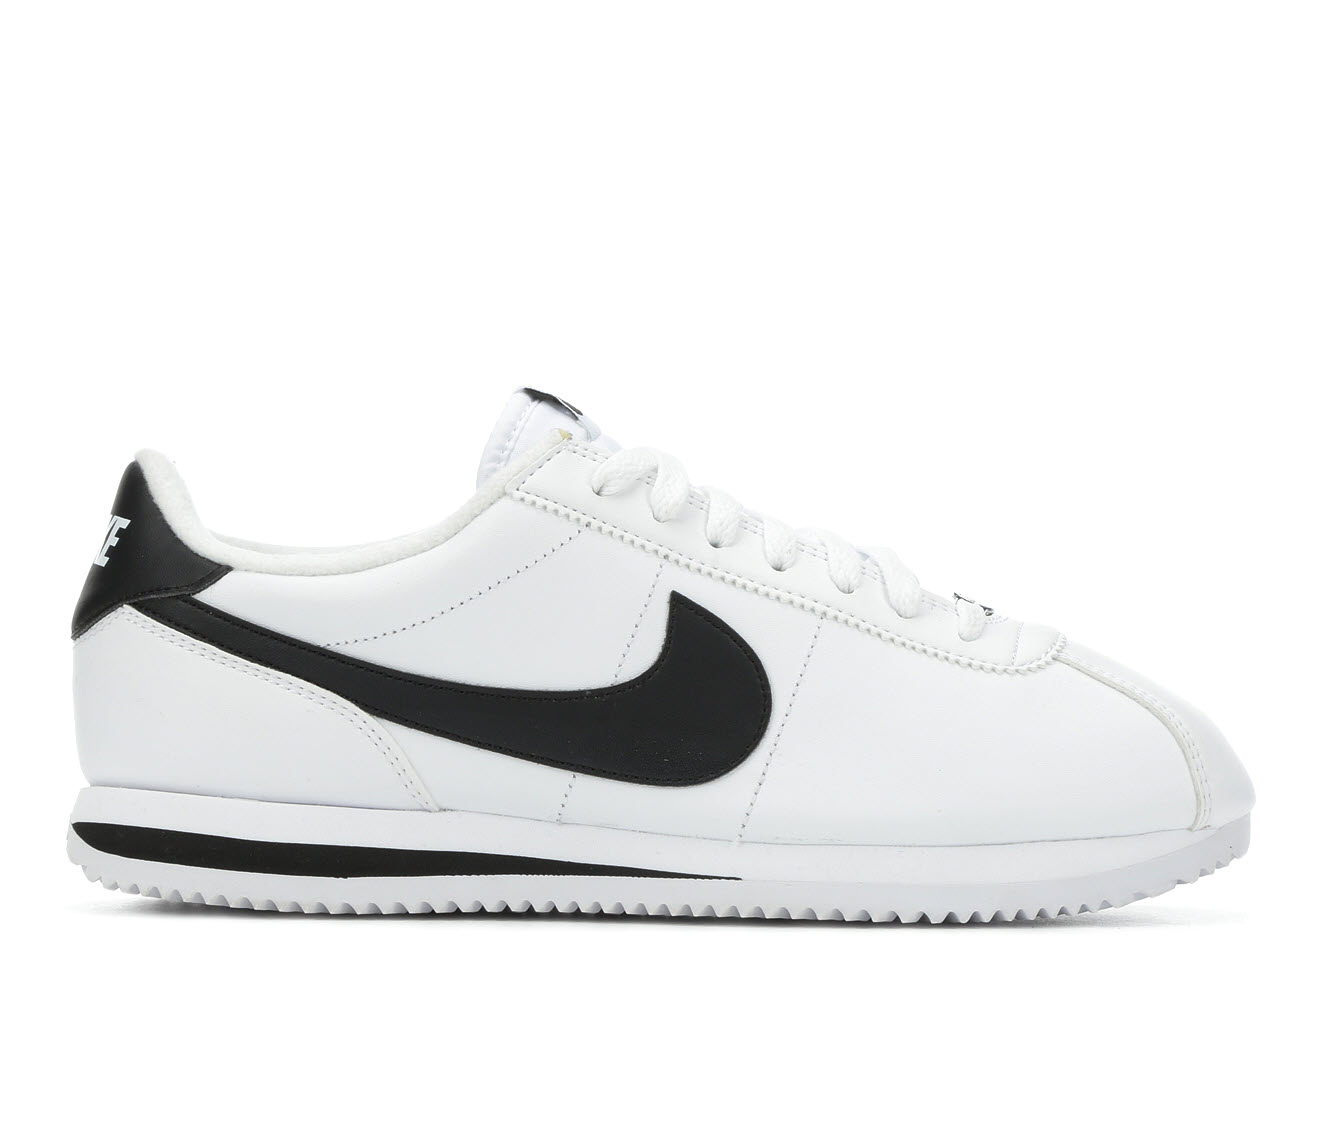 Men's Nike Cortez Basic Leather Sneakers